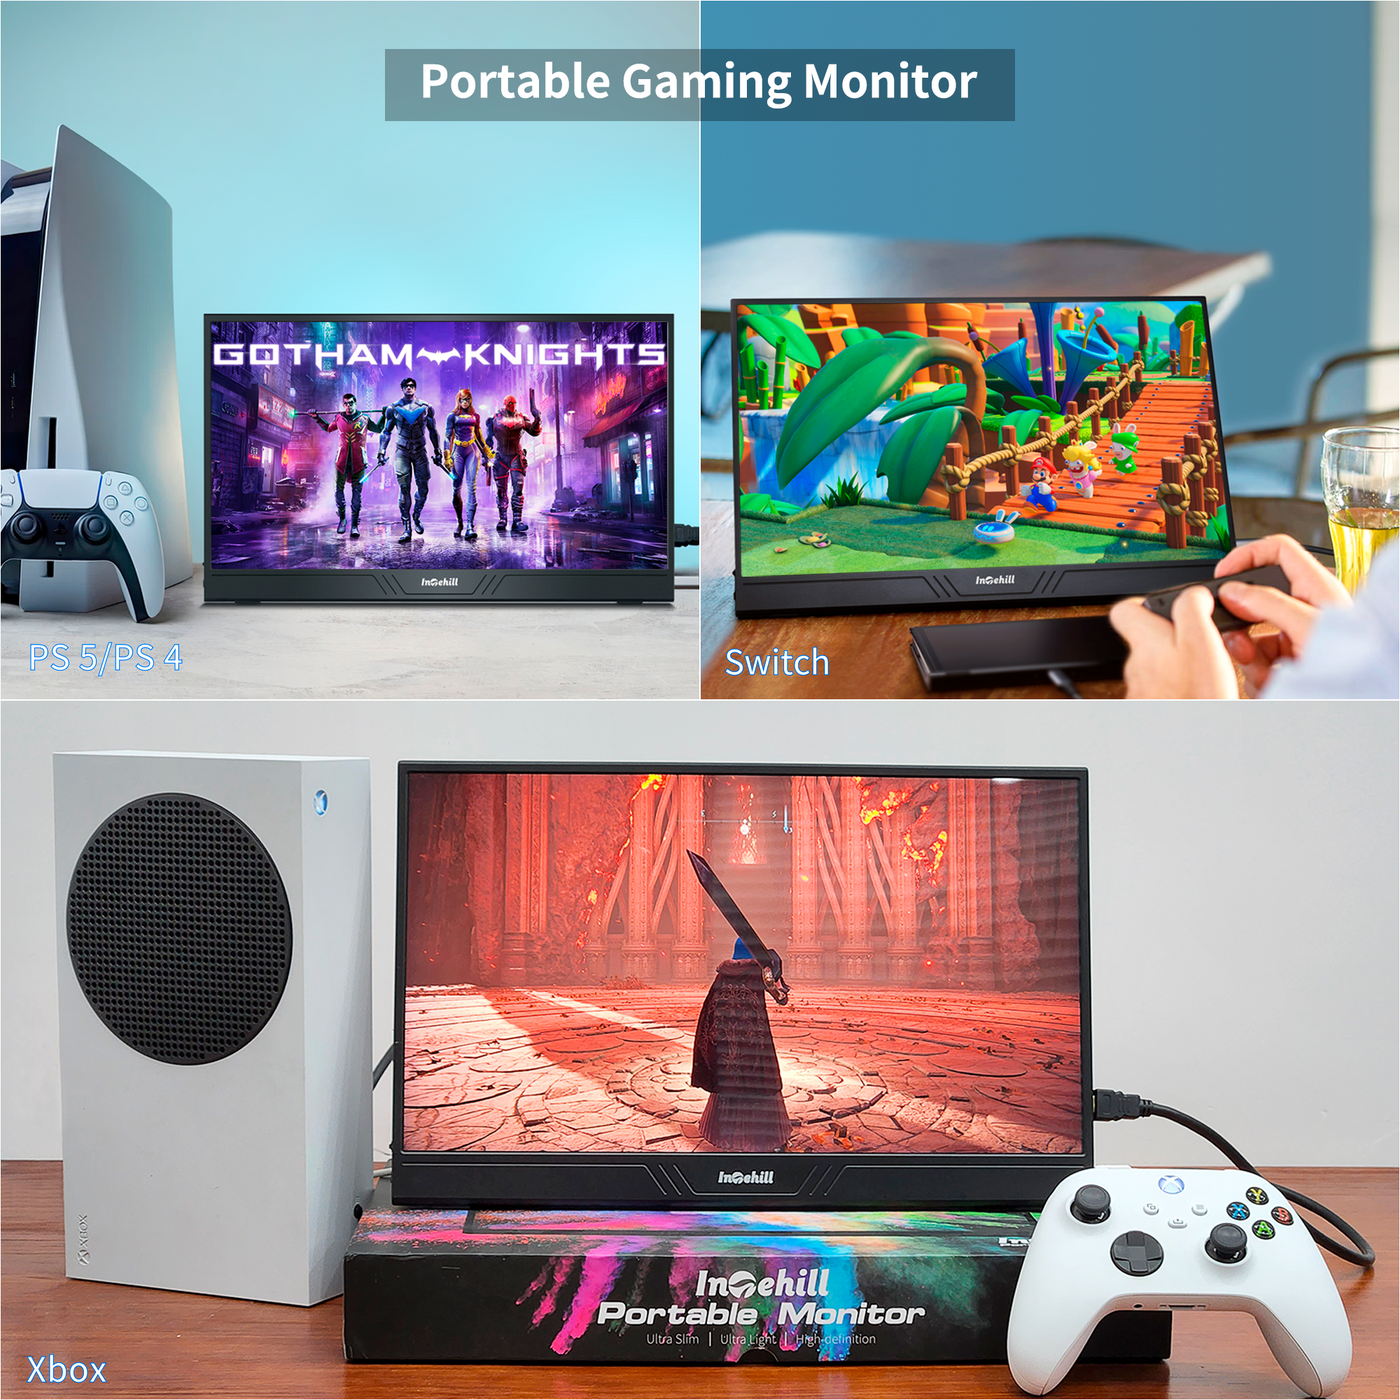 4k portable monitor for gaming consoles